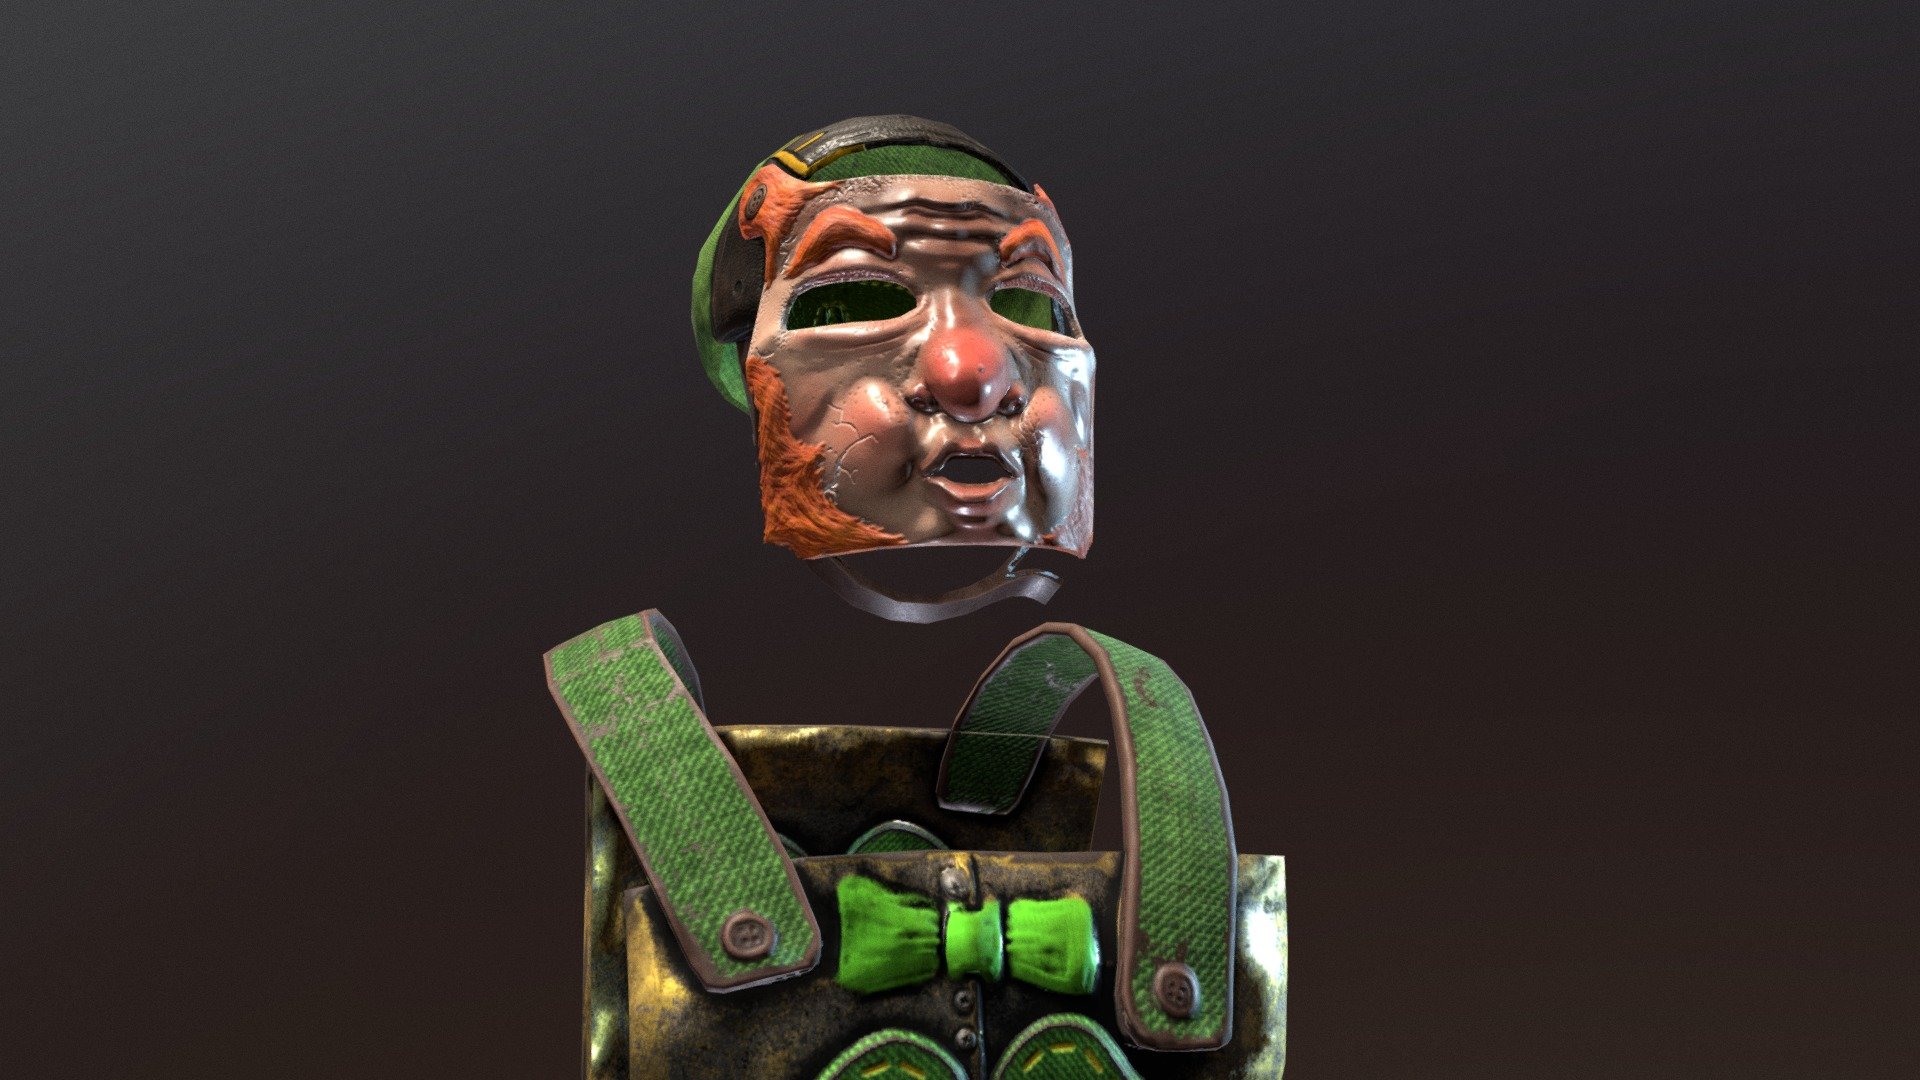 4 leprechaun themed skins for the metal armor in Rust, created for St. Patrick's day 3d model